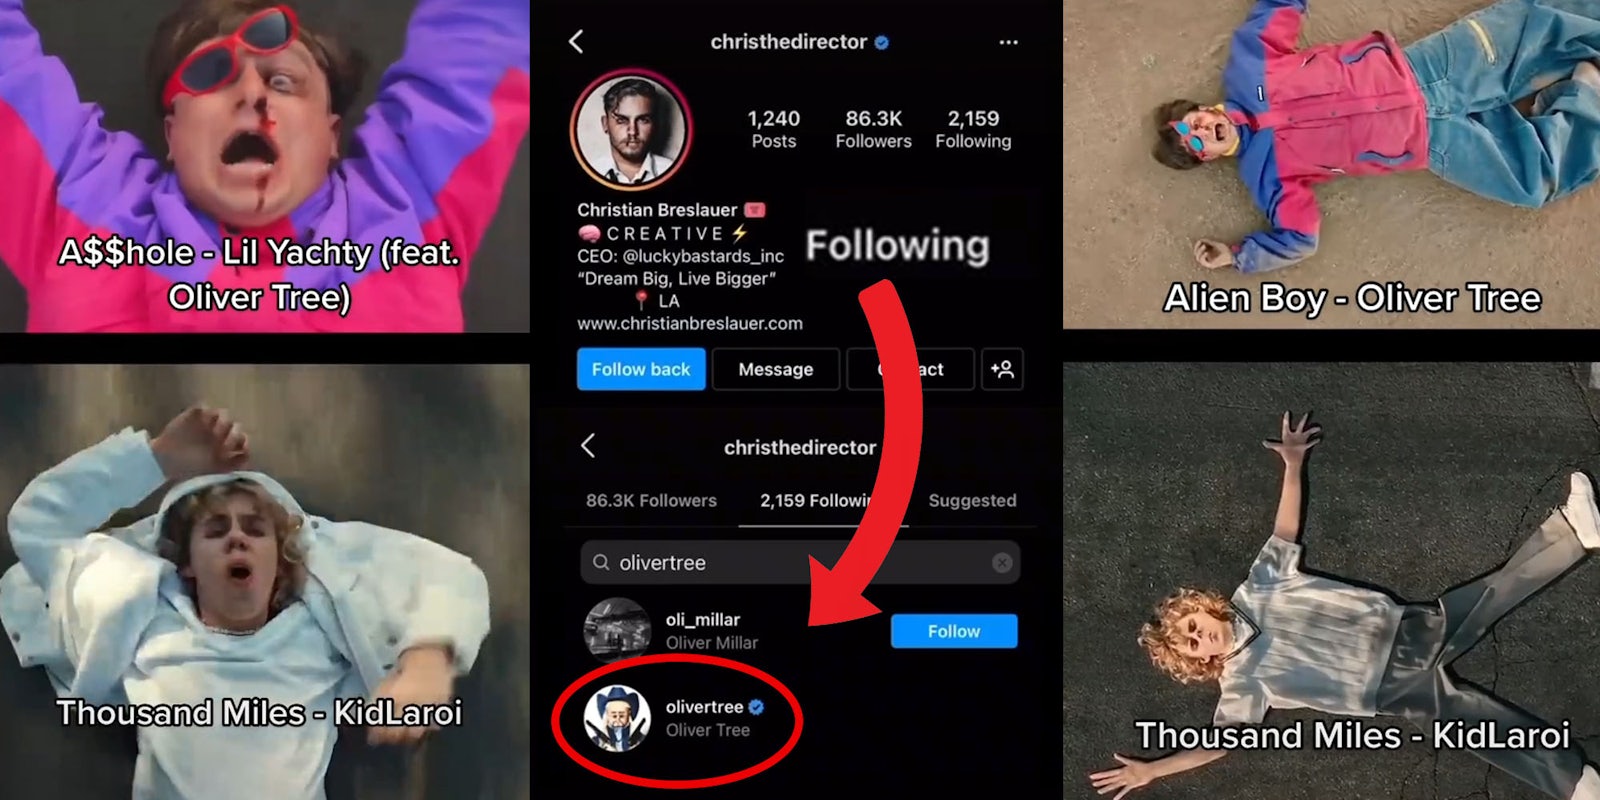 Half and half oliver tree on top KidLaroi below caption 'A$$hole-Lil Yachty (feat. Oliver Tree) (l) christhedirector's instagram page showing he followed Oliver Tree red arrow and red oval (c) Half and half Oliver Tree above Kid Laroi below caption 'Alien Boy- Oliver Tree' 'Thousand Miles- KidLaroi' (r)